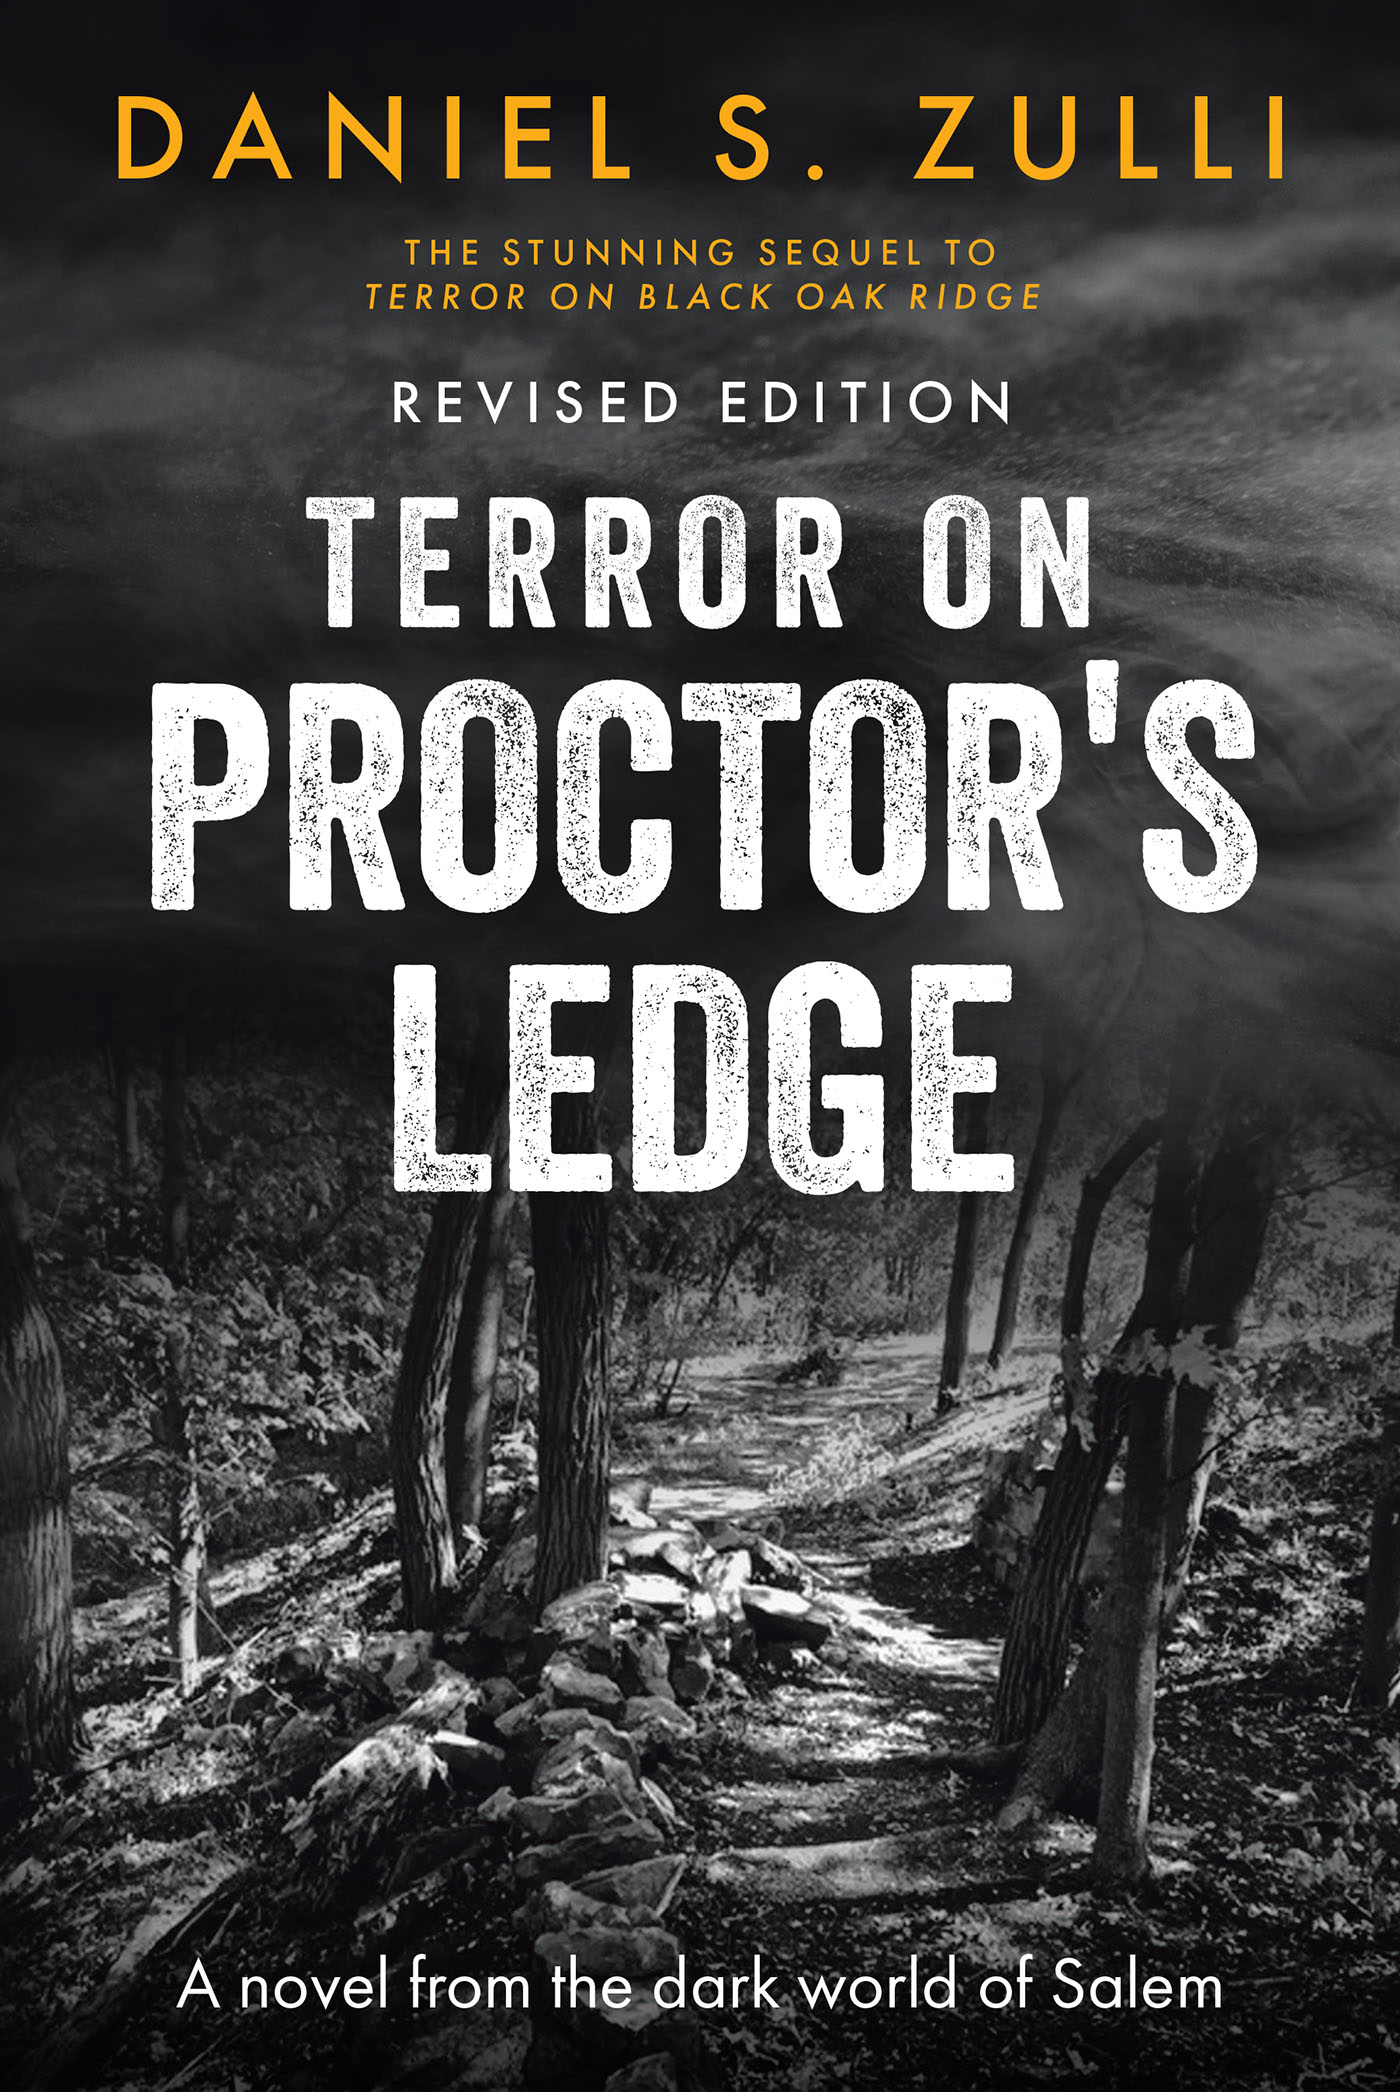 Daniel S. Zulli’s Newly Released “Terror on Proctor’s Ledge: A novel from the dark world of Salem: Revised Edition” is a Compelling Tale of Suspense and Intrigue